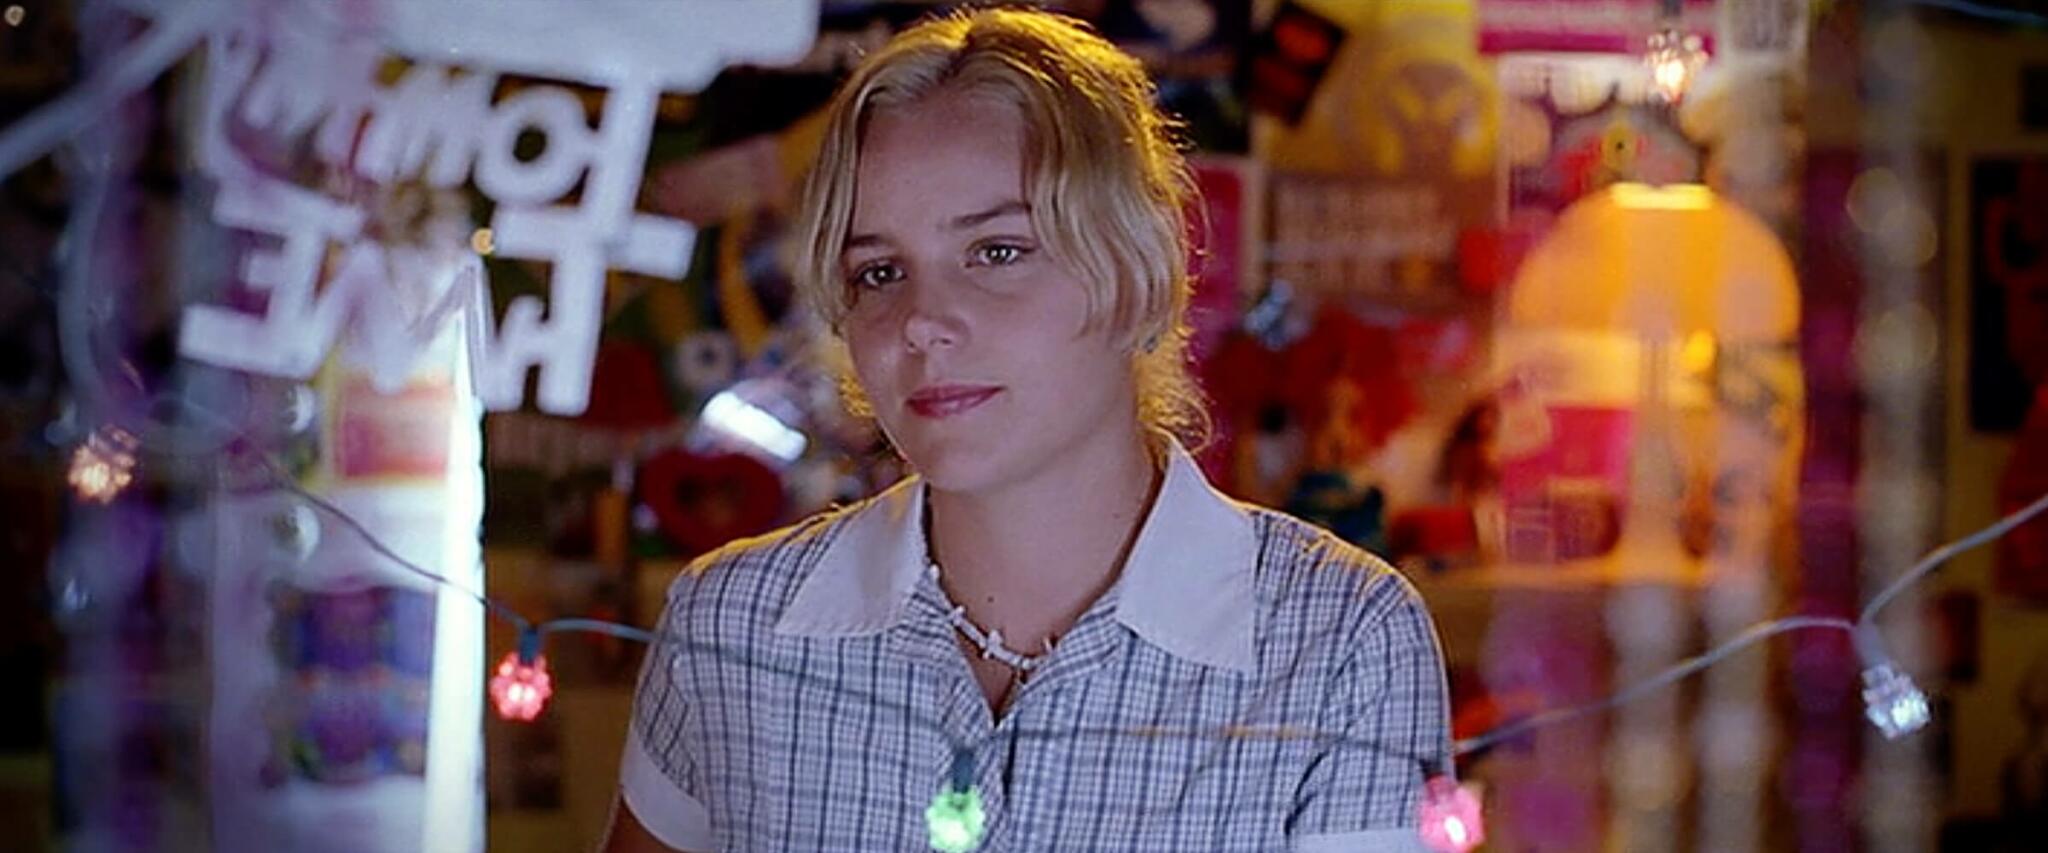 Abbie Cornish in "One Perfect Day"